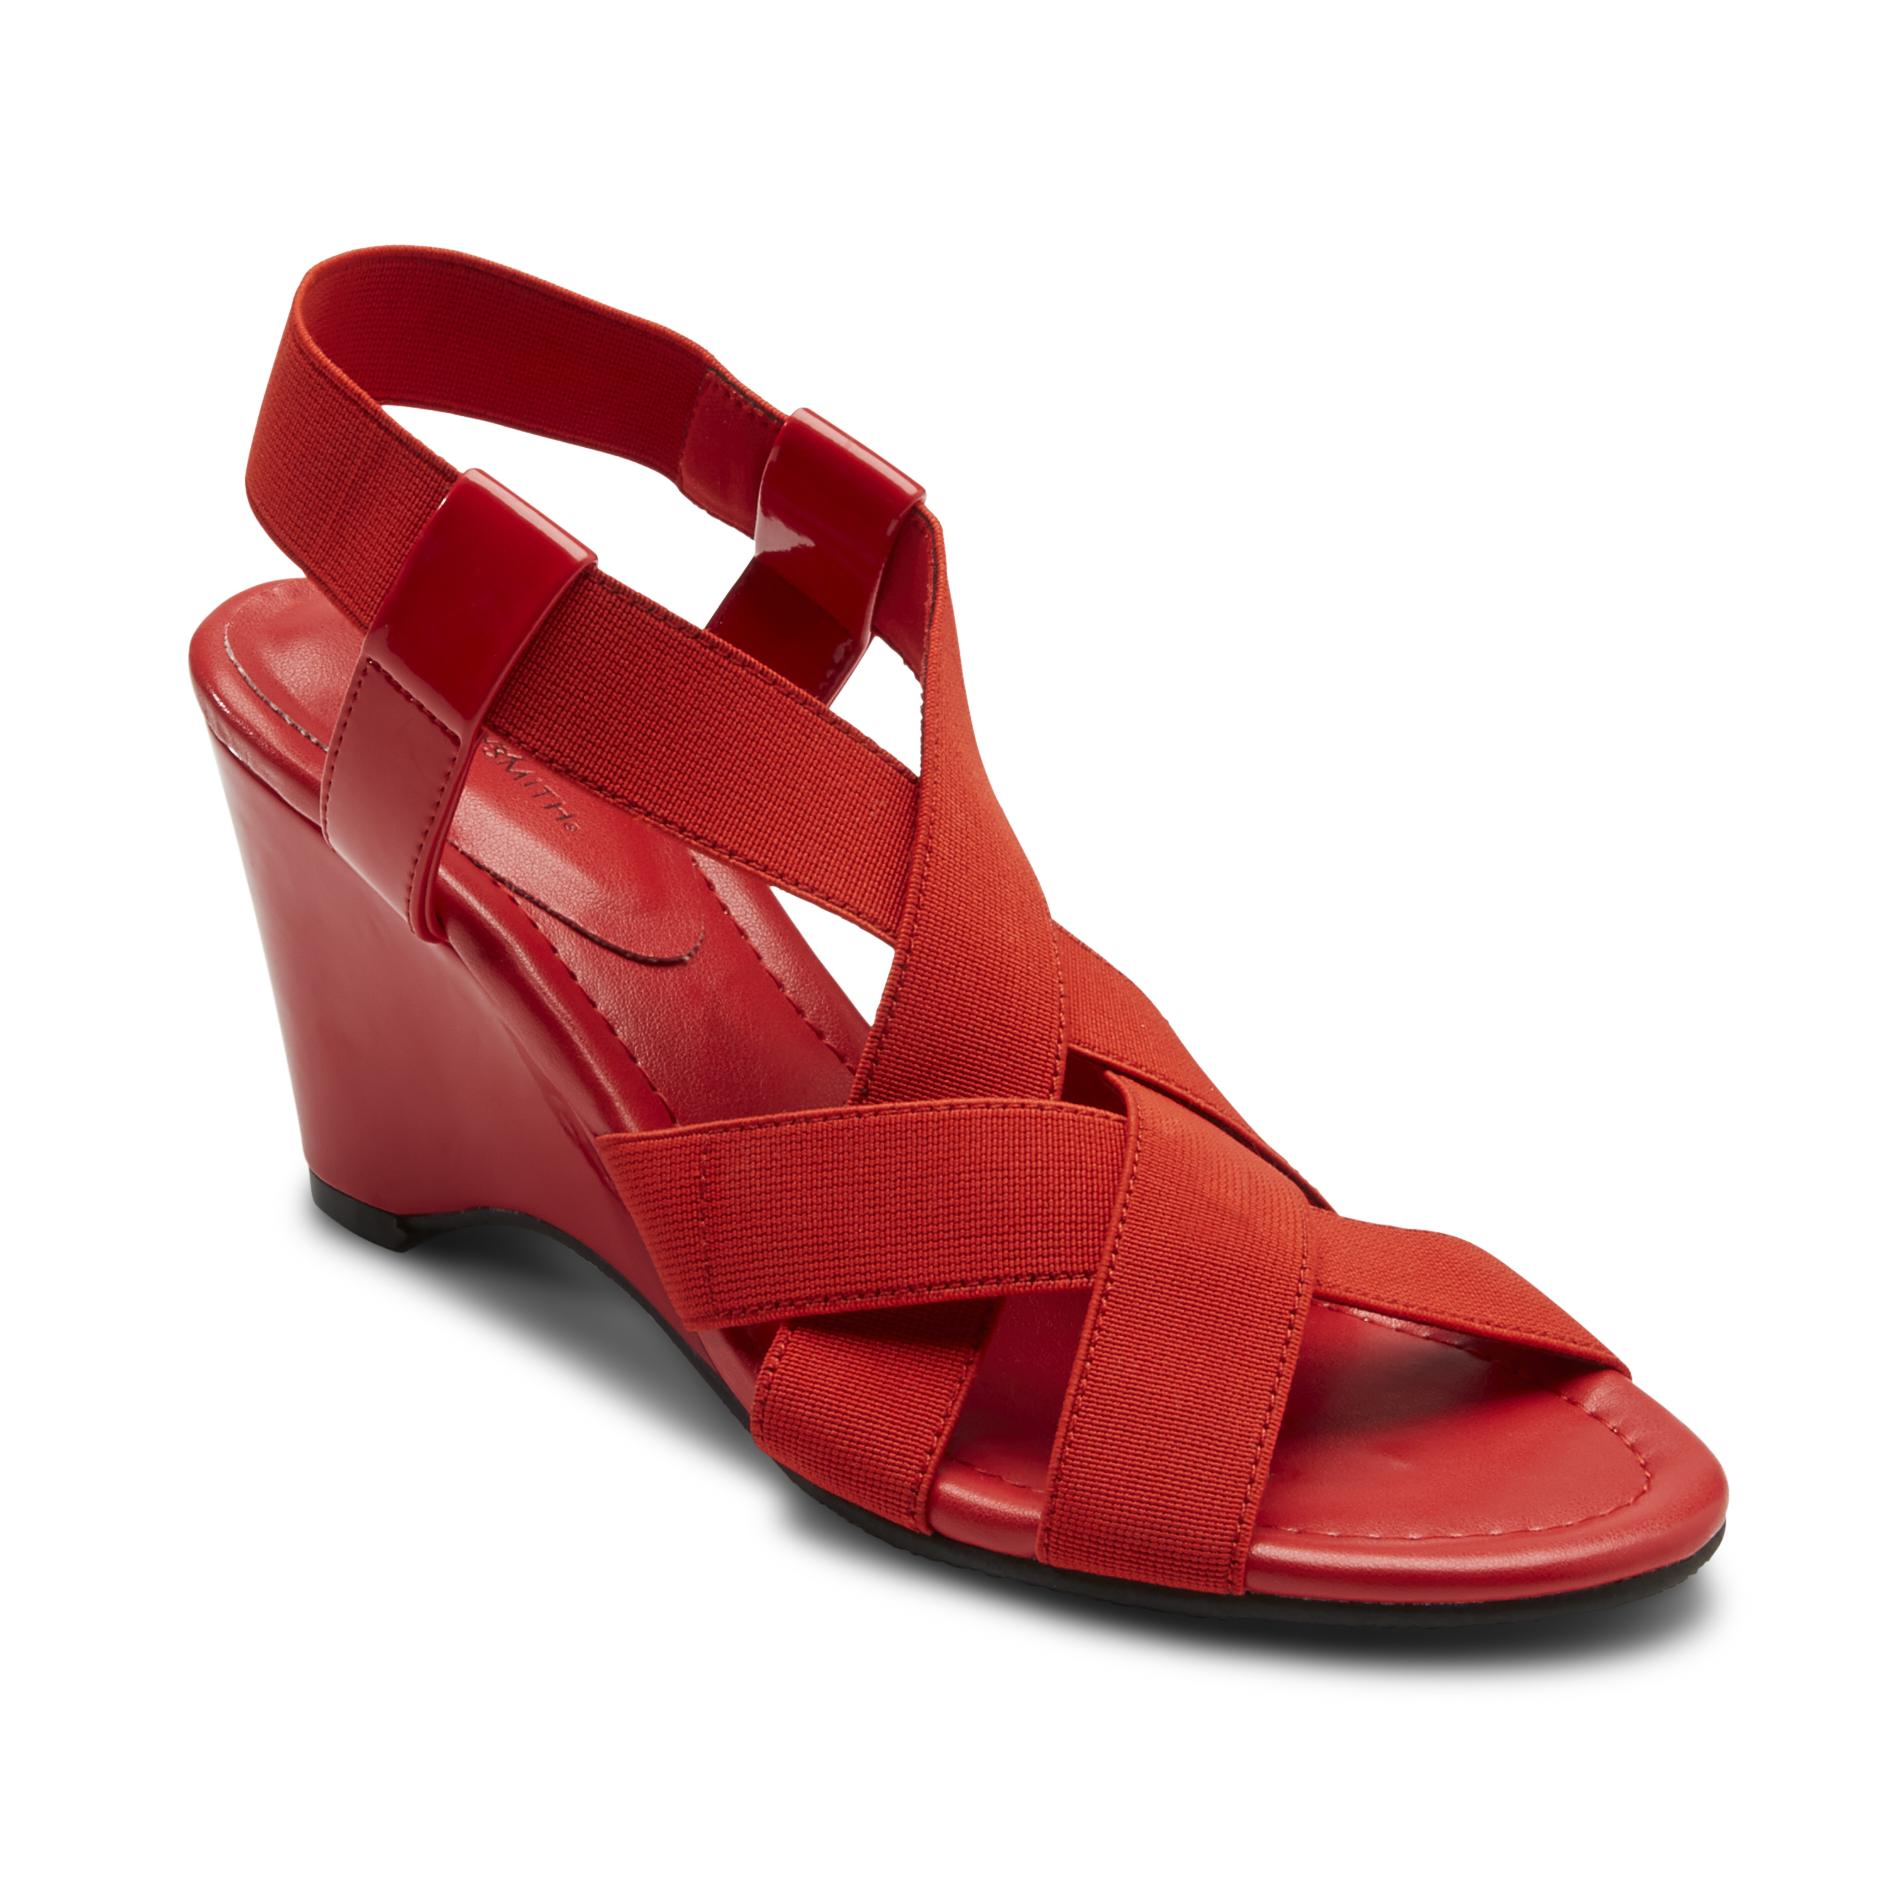 Jaclyn Smith Women's Ammy Red Strappy Wedge Sandal